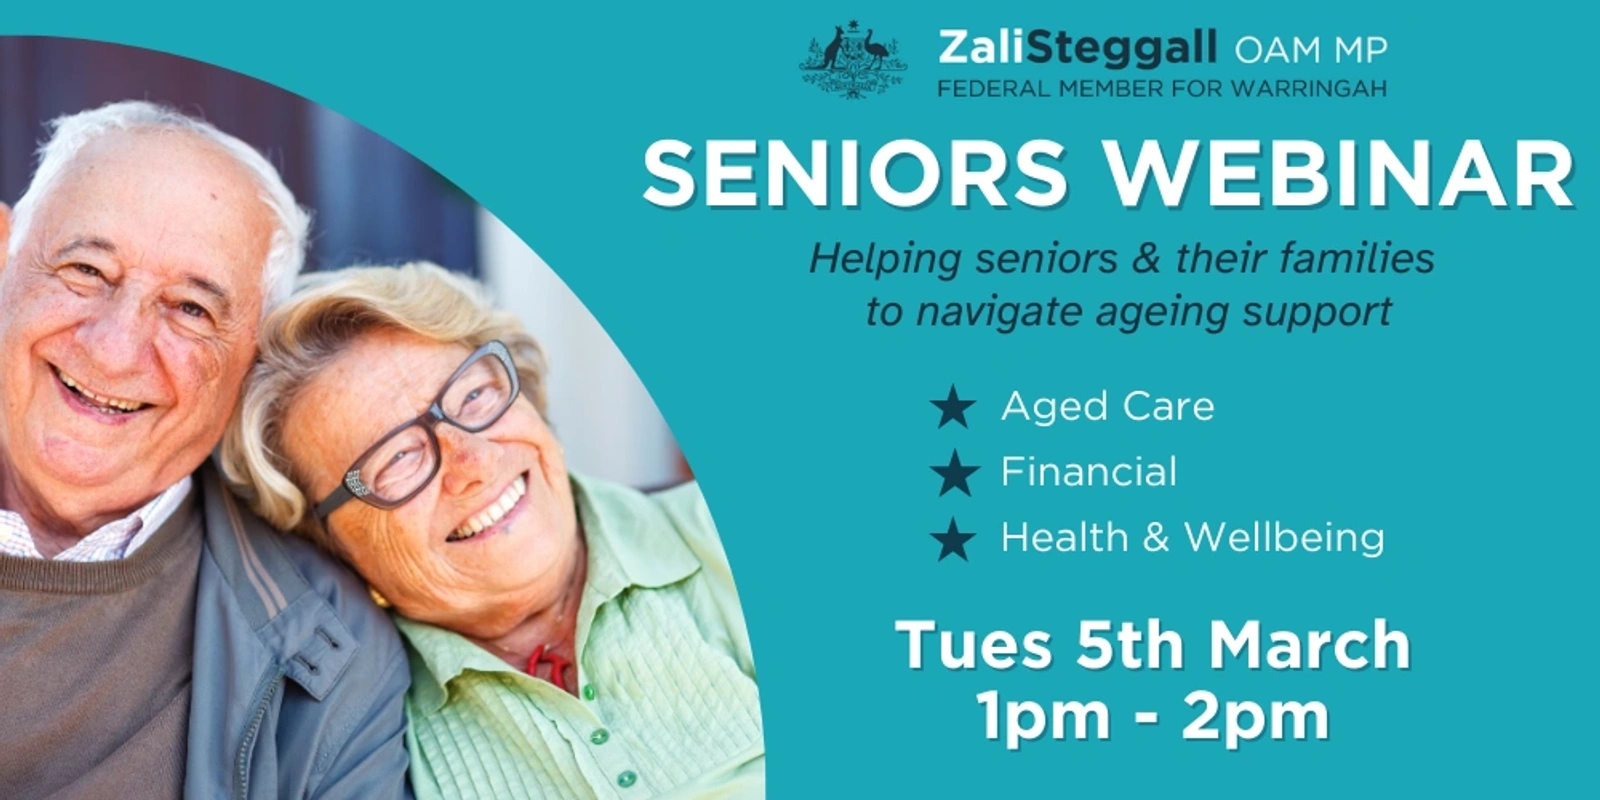 SENIORS WEBINAR - Helping seniors and their families to navigate ageing support